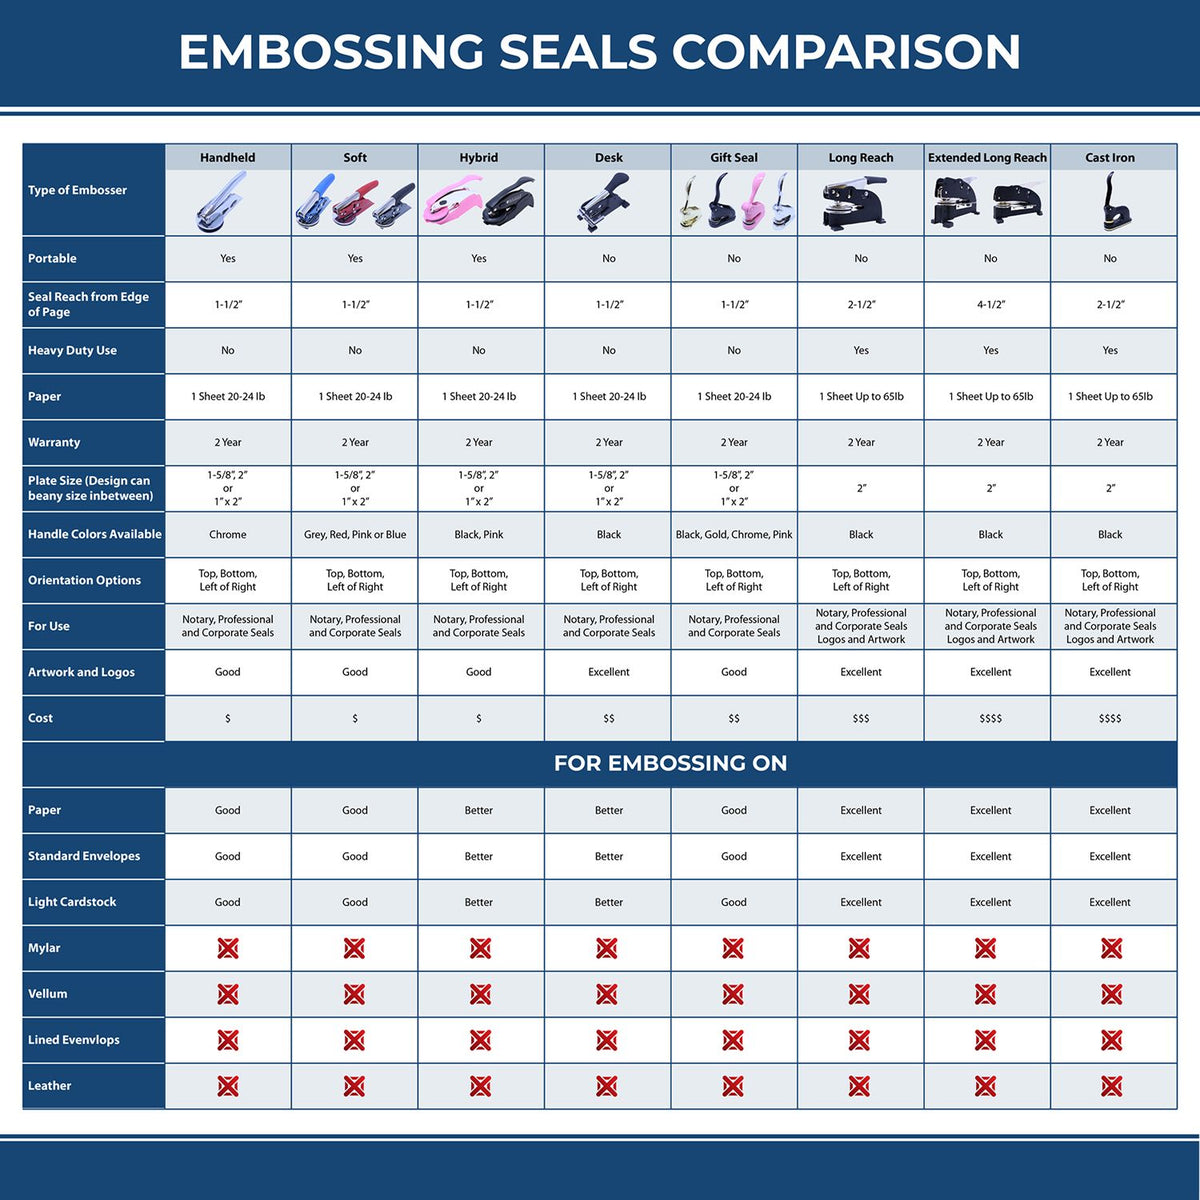 A comparison chart for the different types of mount models available for the Soft Nevada Professional Geologist Seal